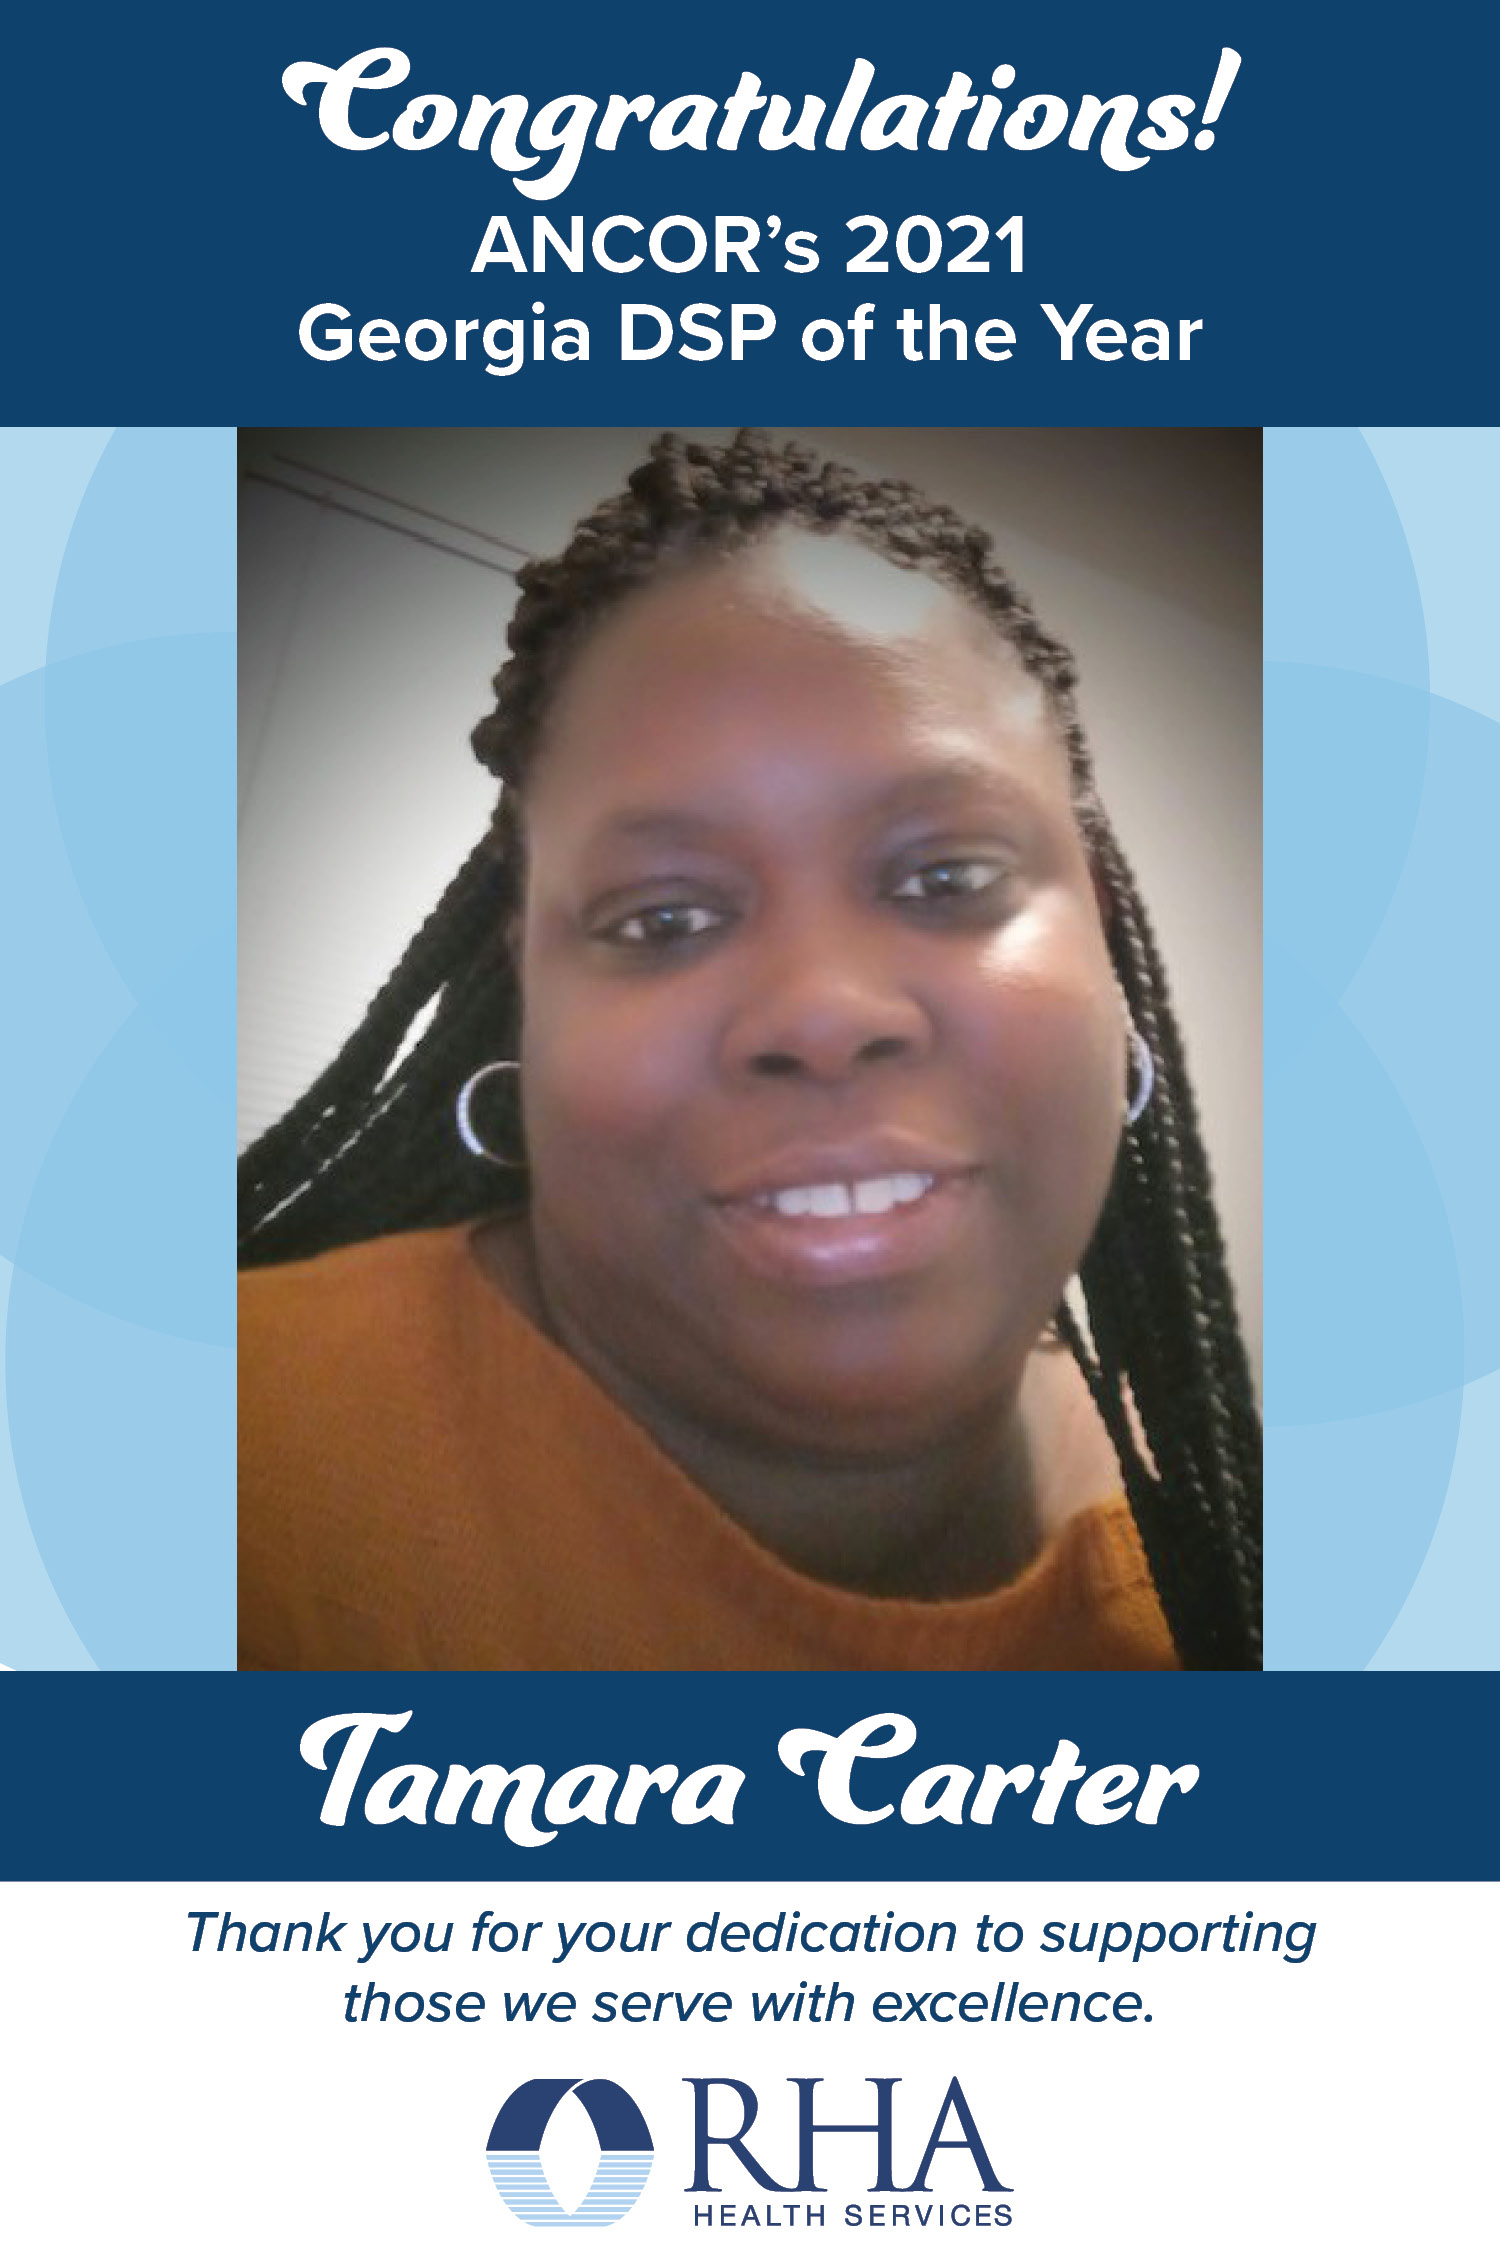 National Disability Provider Association Names Tamara Carter Recipient of 2021 Georgia Direct Support Professional of the Year Award